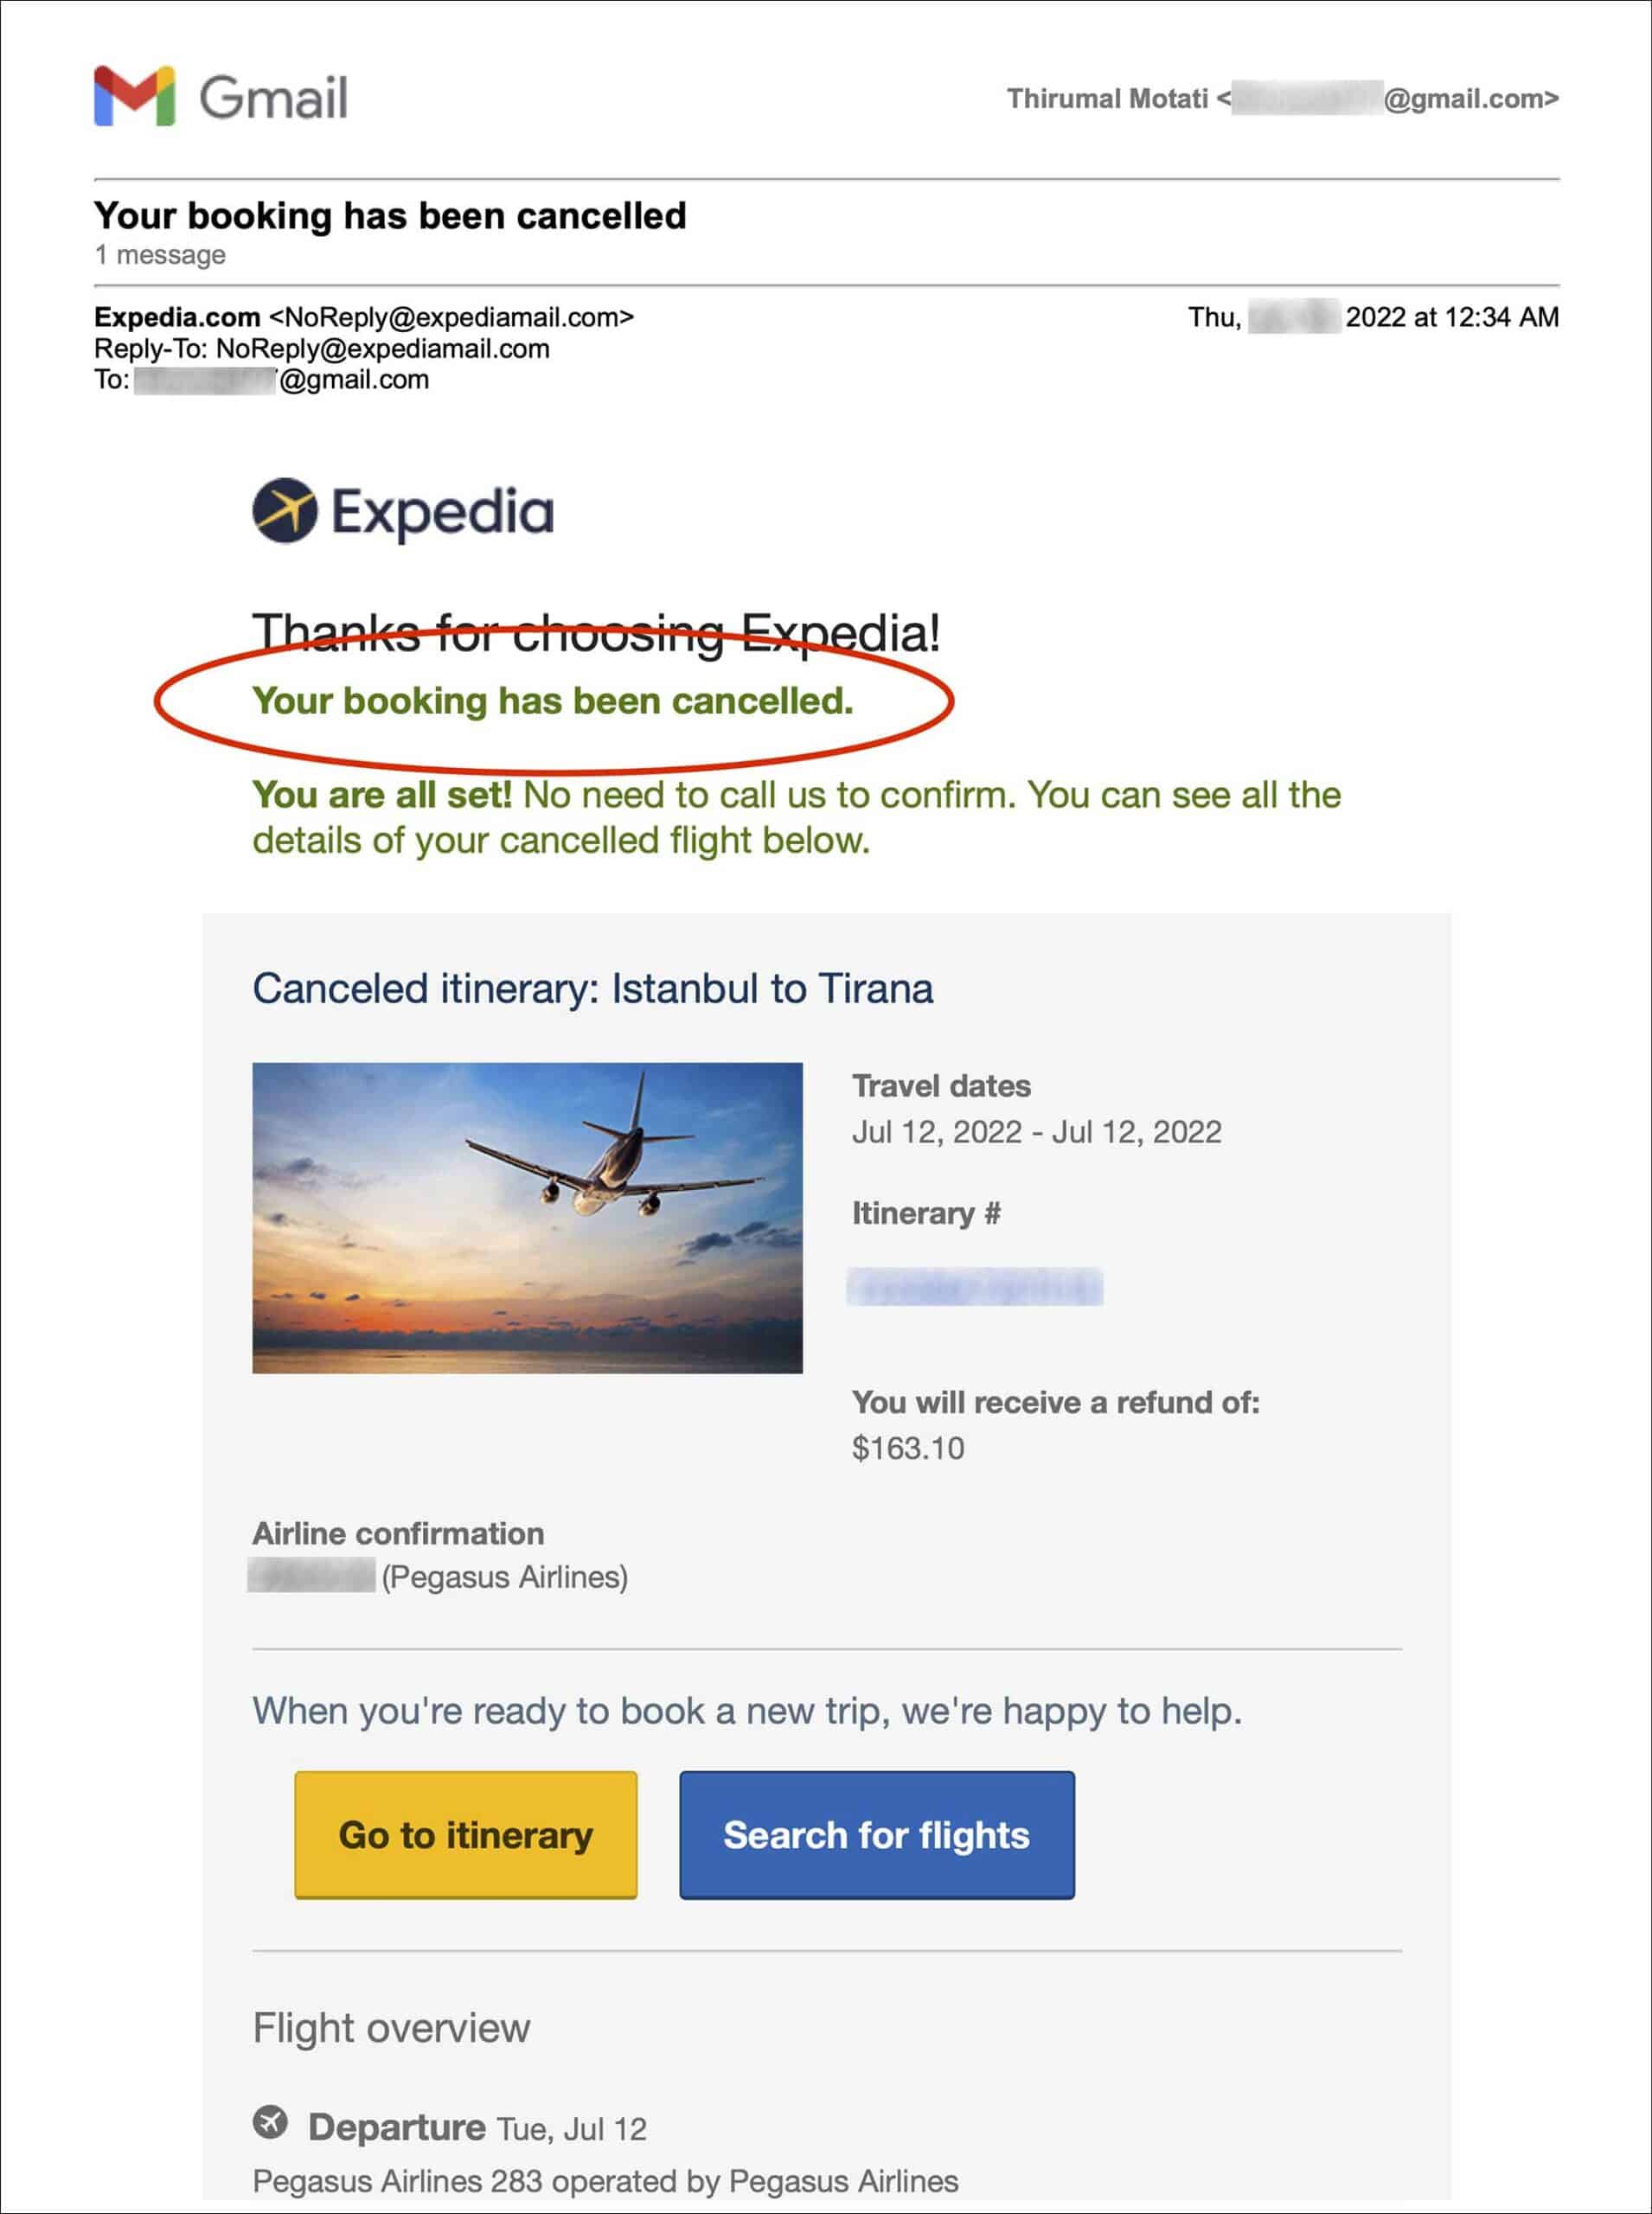 expedia travel phone number 24 hours